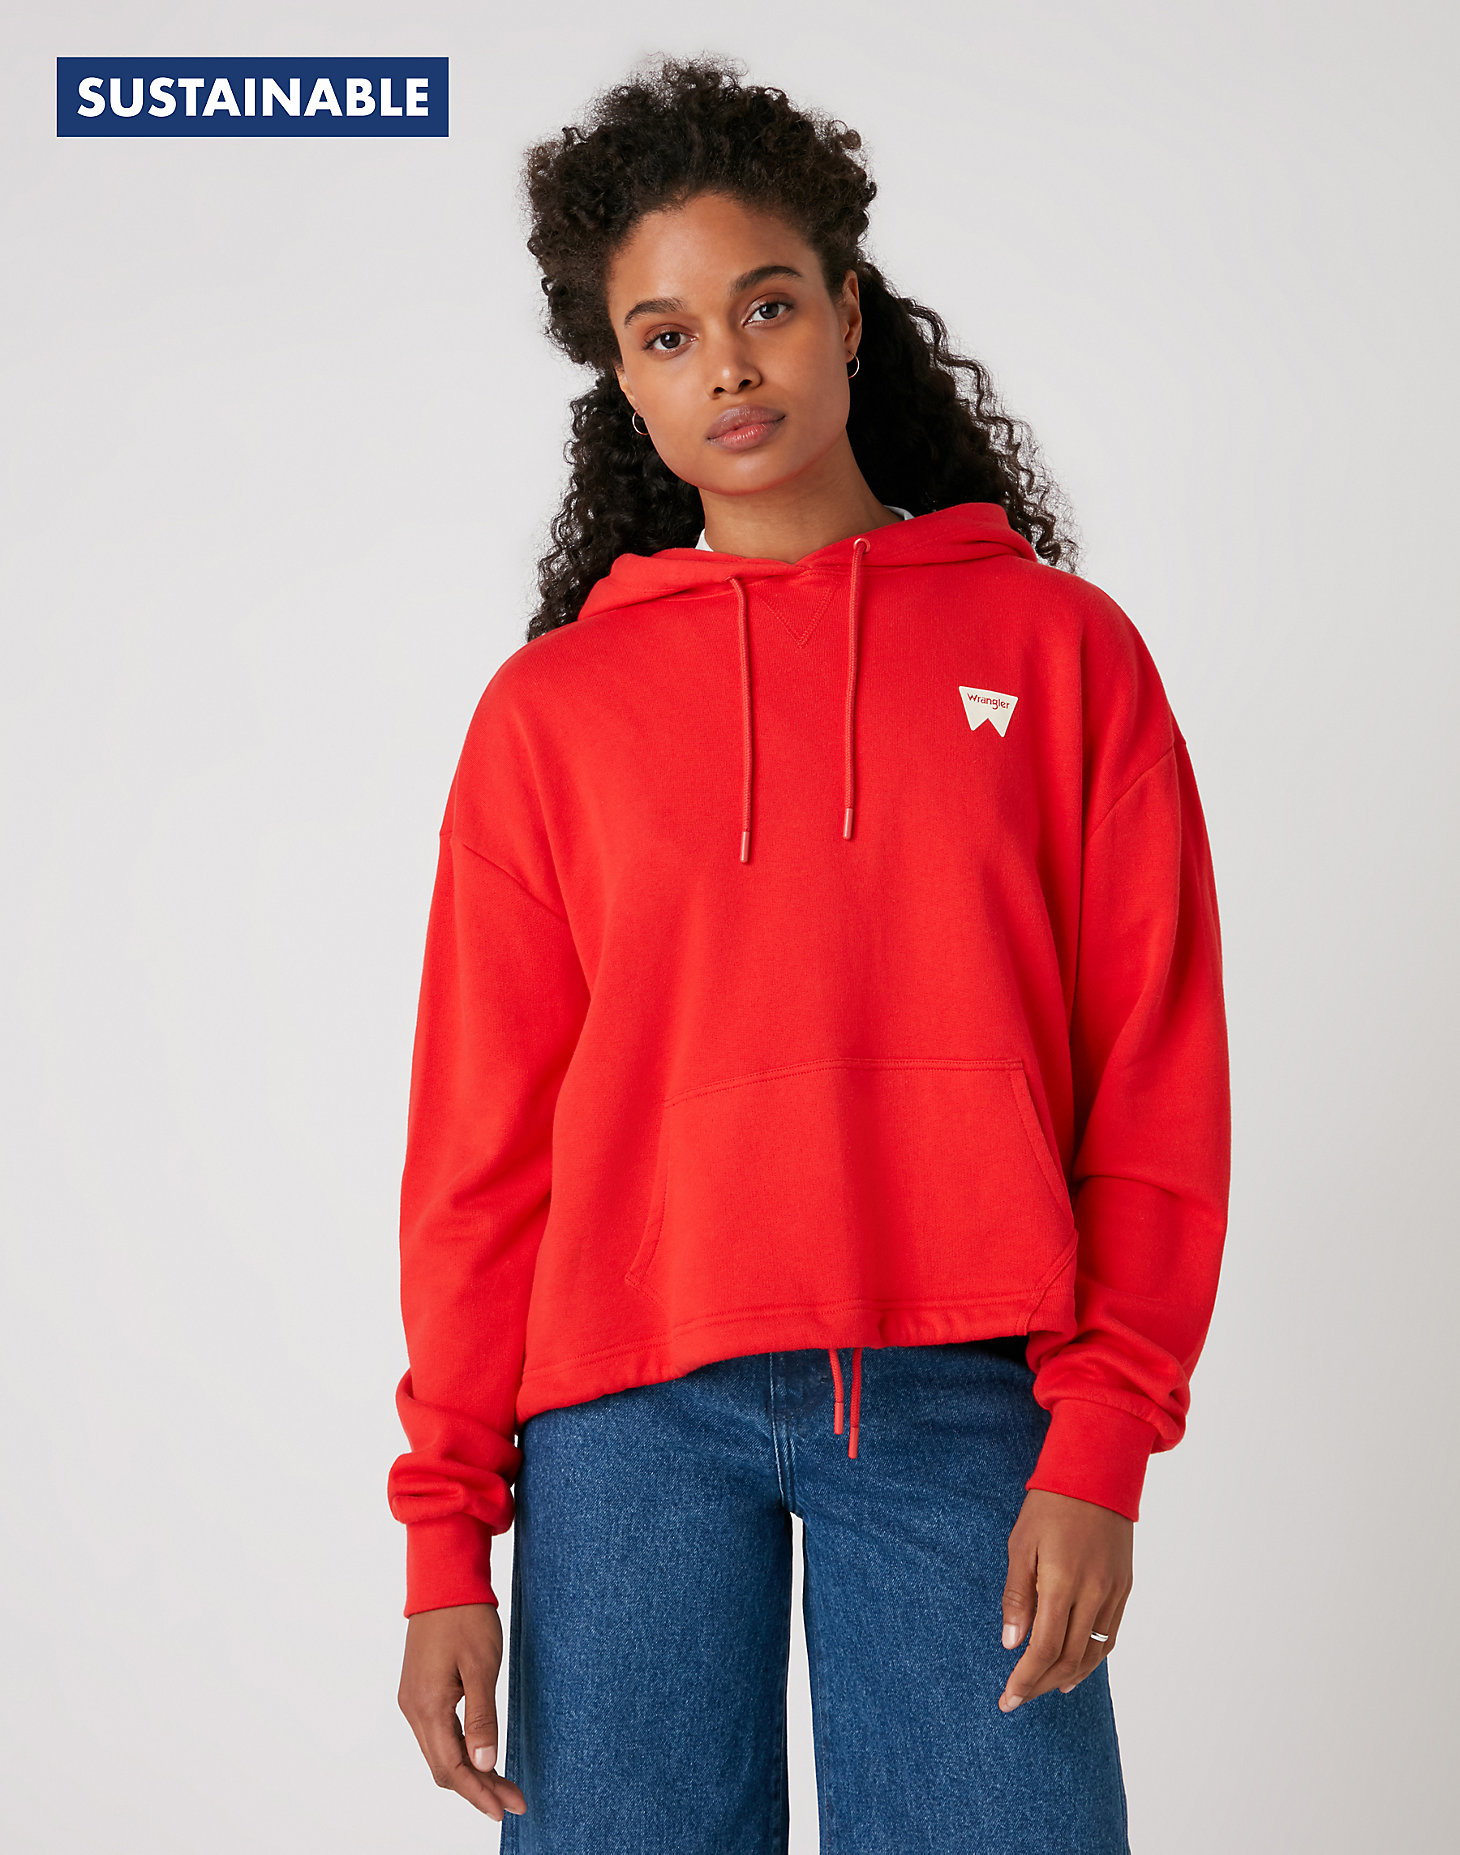 Drawcord Hoody in Flame Red main view